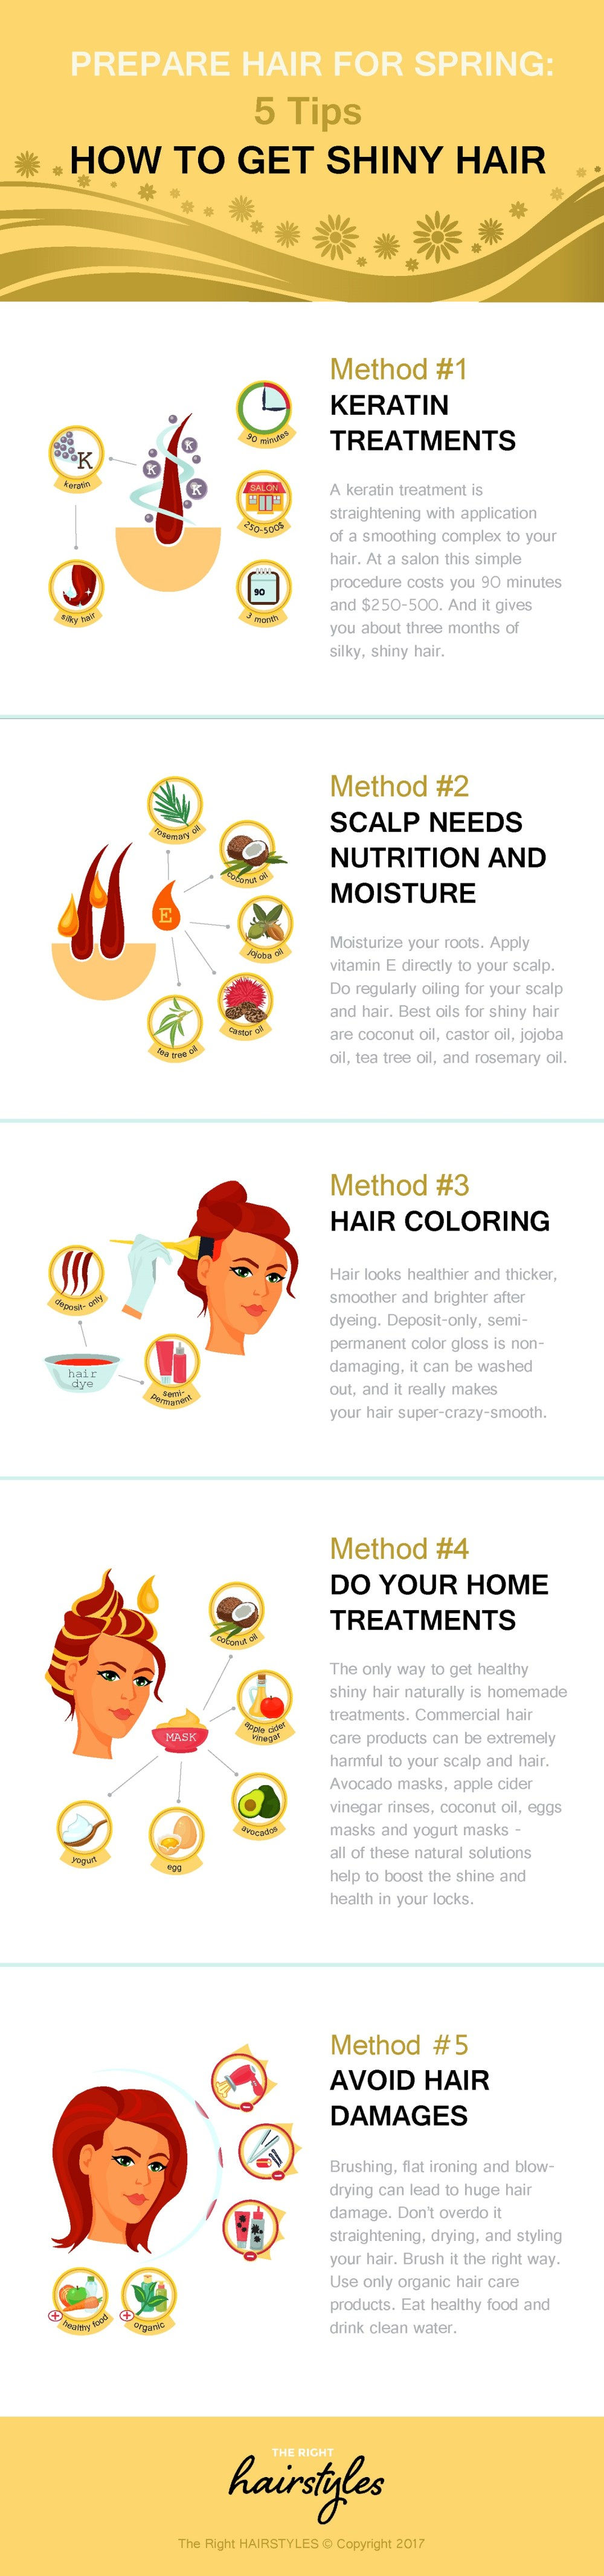 A pregati Hair for Spring - Infographic